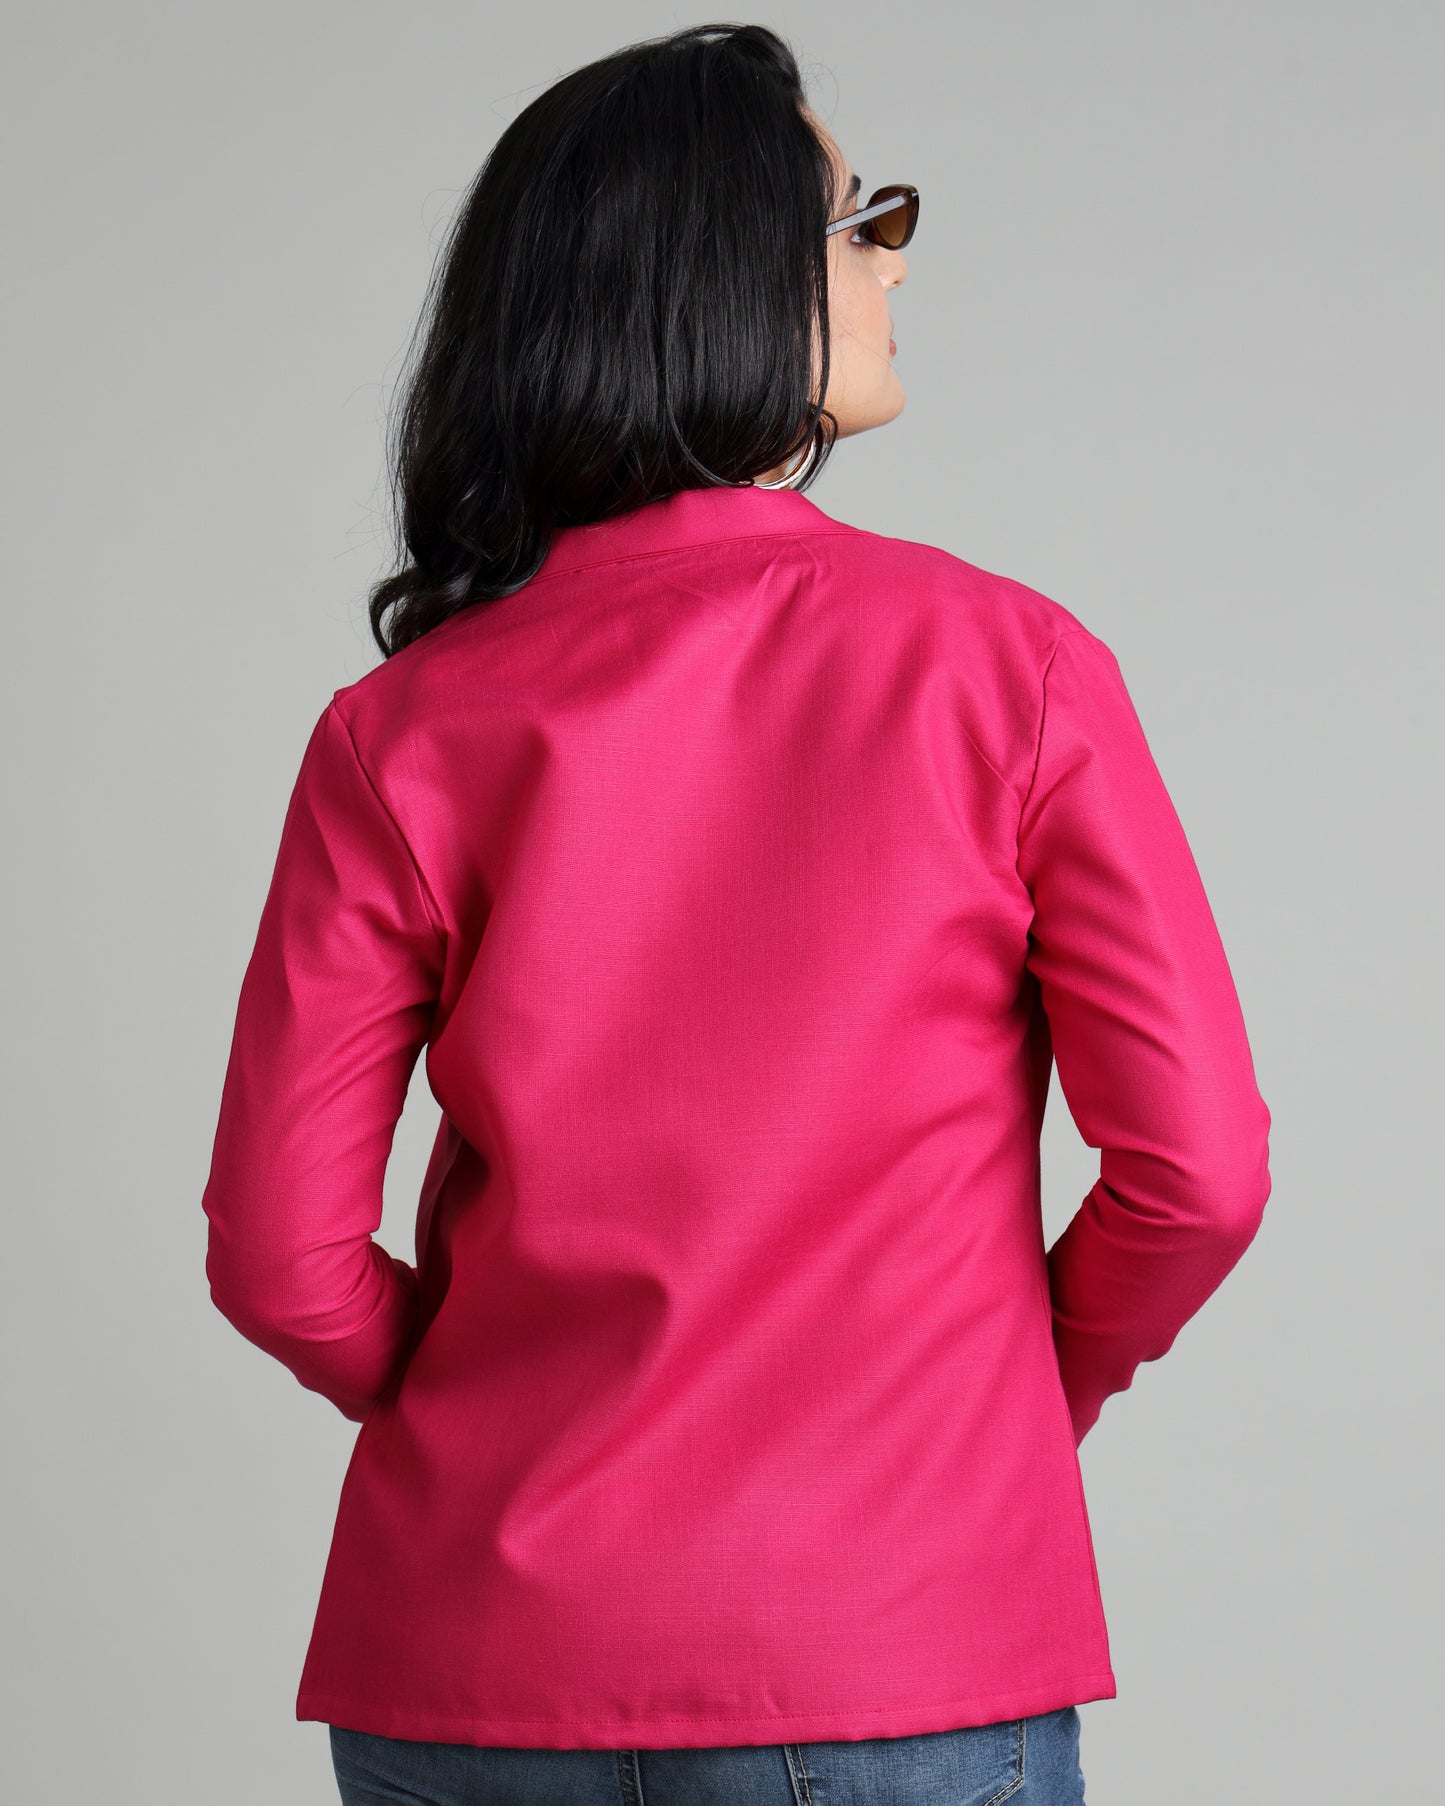 Fabcurate's Elevated Workwear Women's Jacket